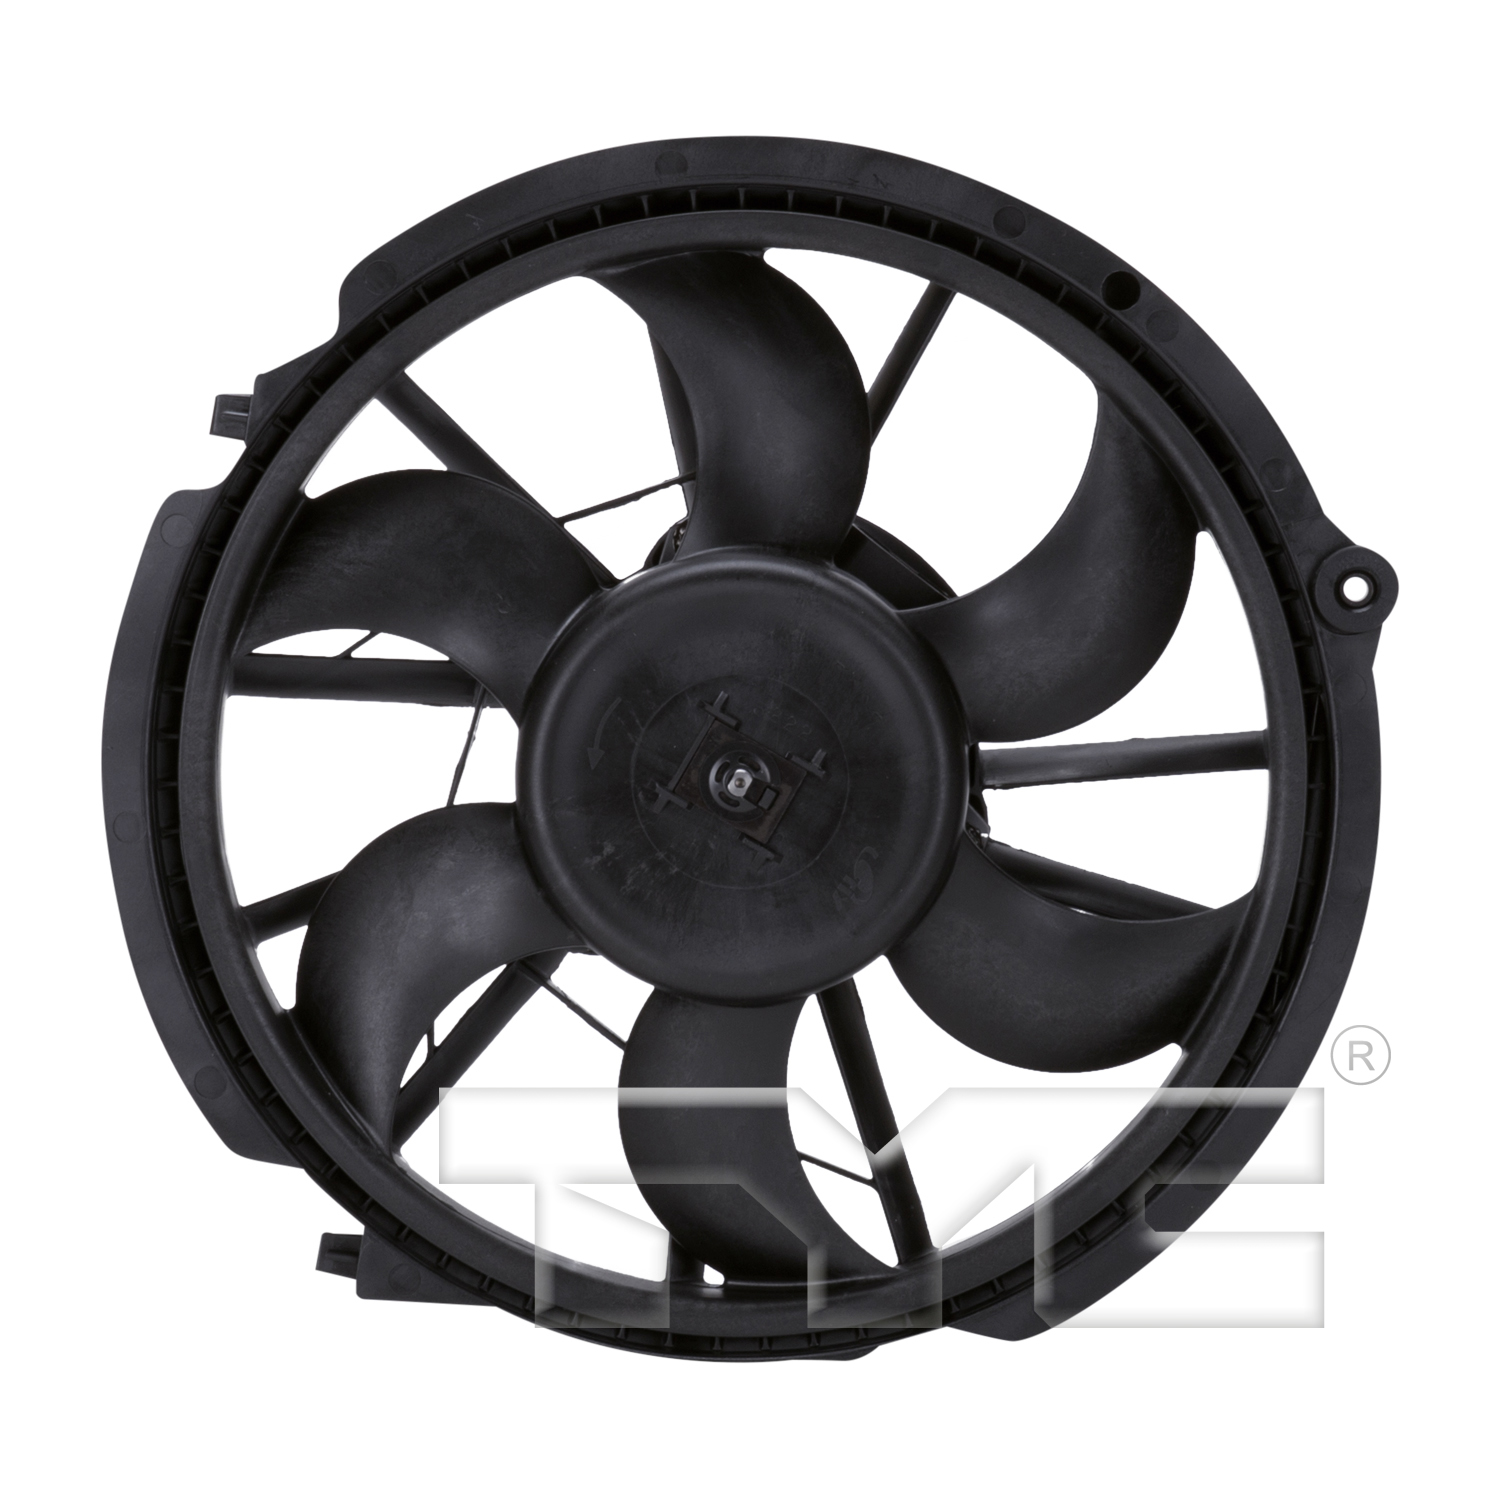 Aftermarket FAN ASSEMBLY/FAN SHROUDS for MERCURY - SABLE, SABLE,96-97,Radiator cooling fan assy